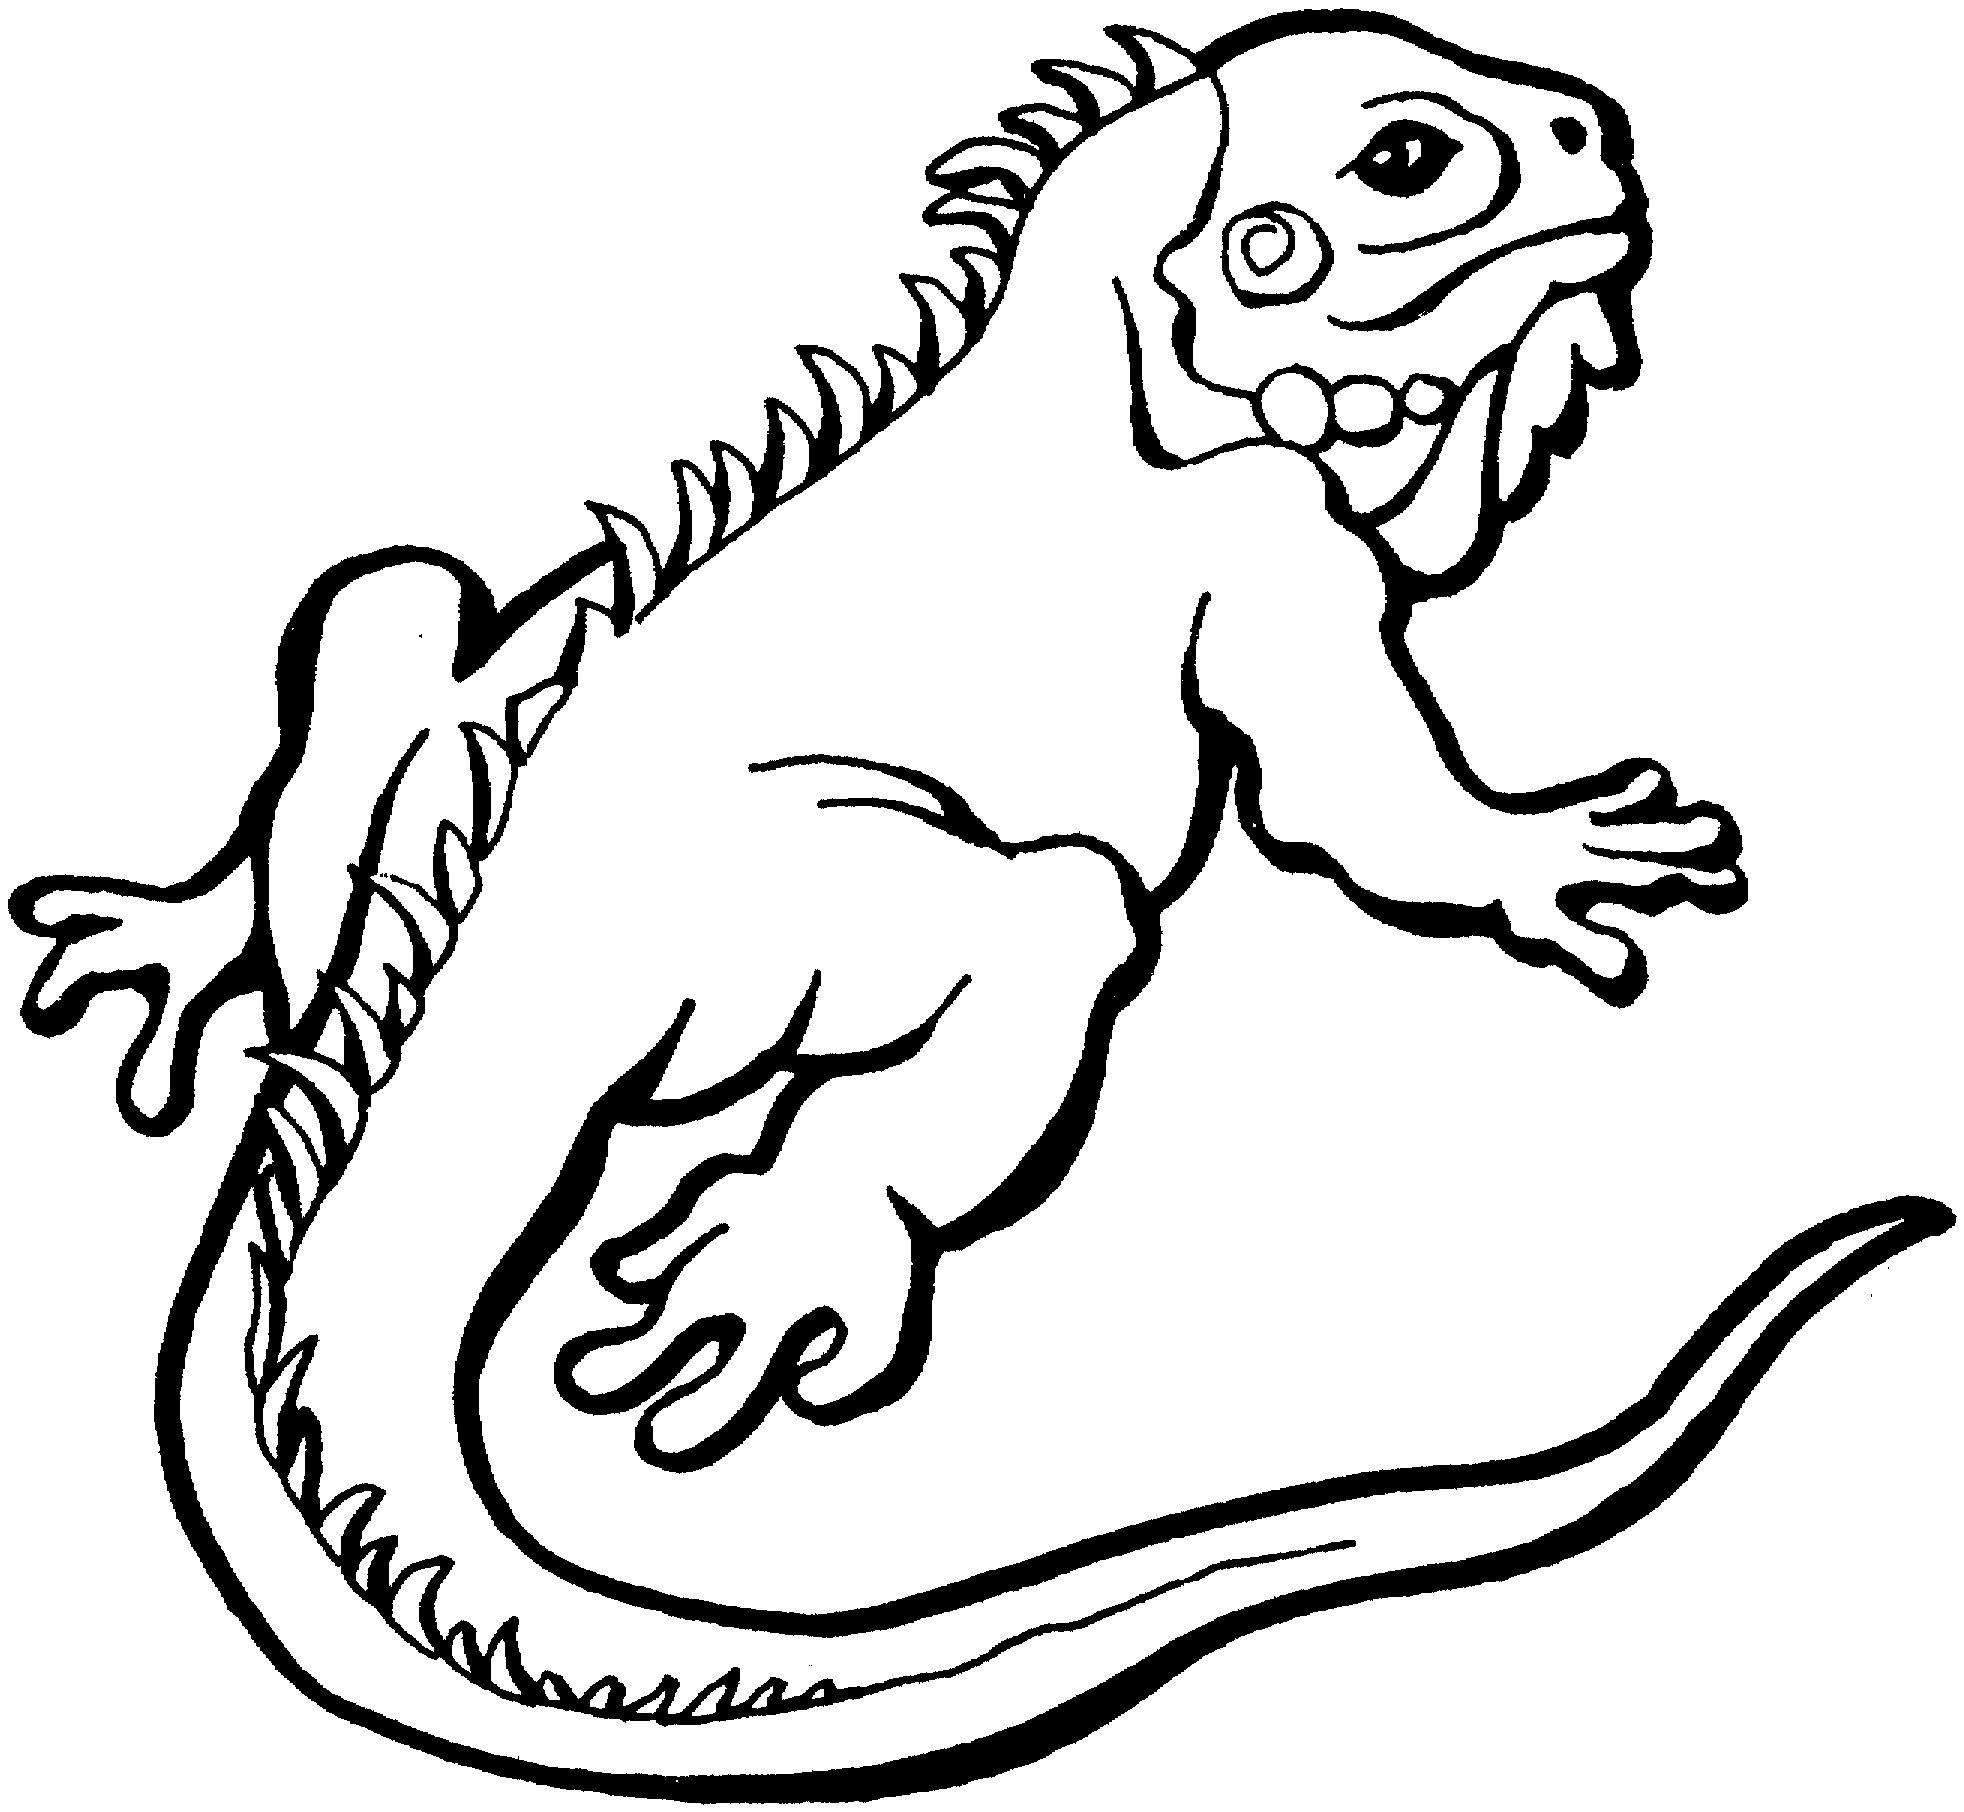 Grassland Animals Coloring Pages Png ...pngio.com